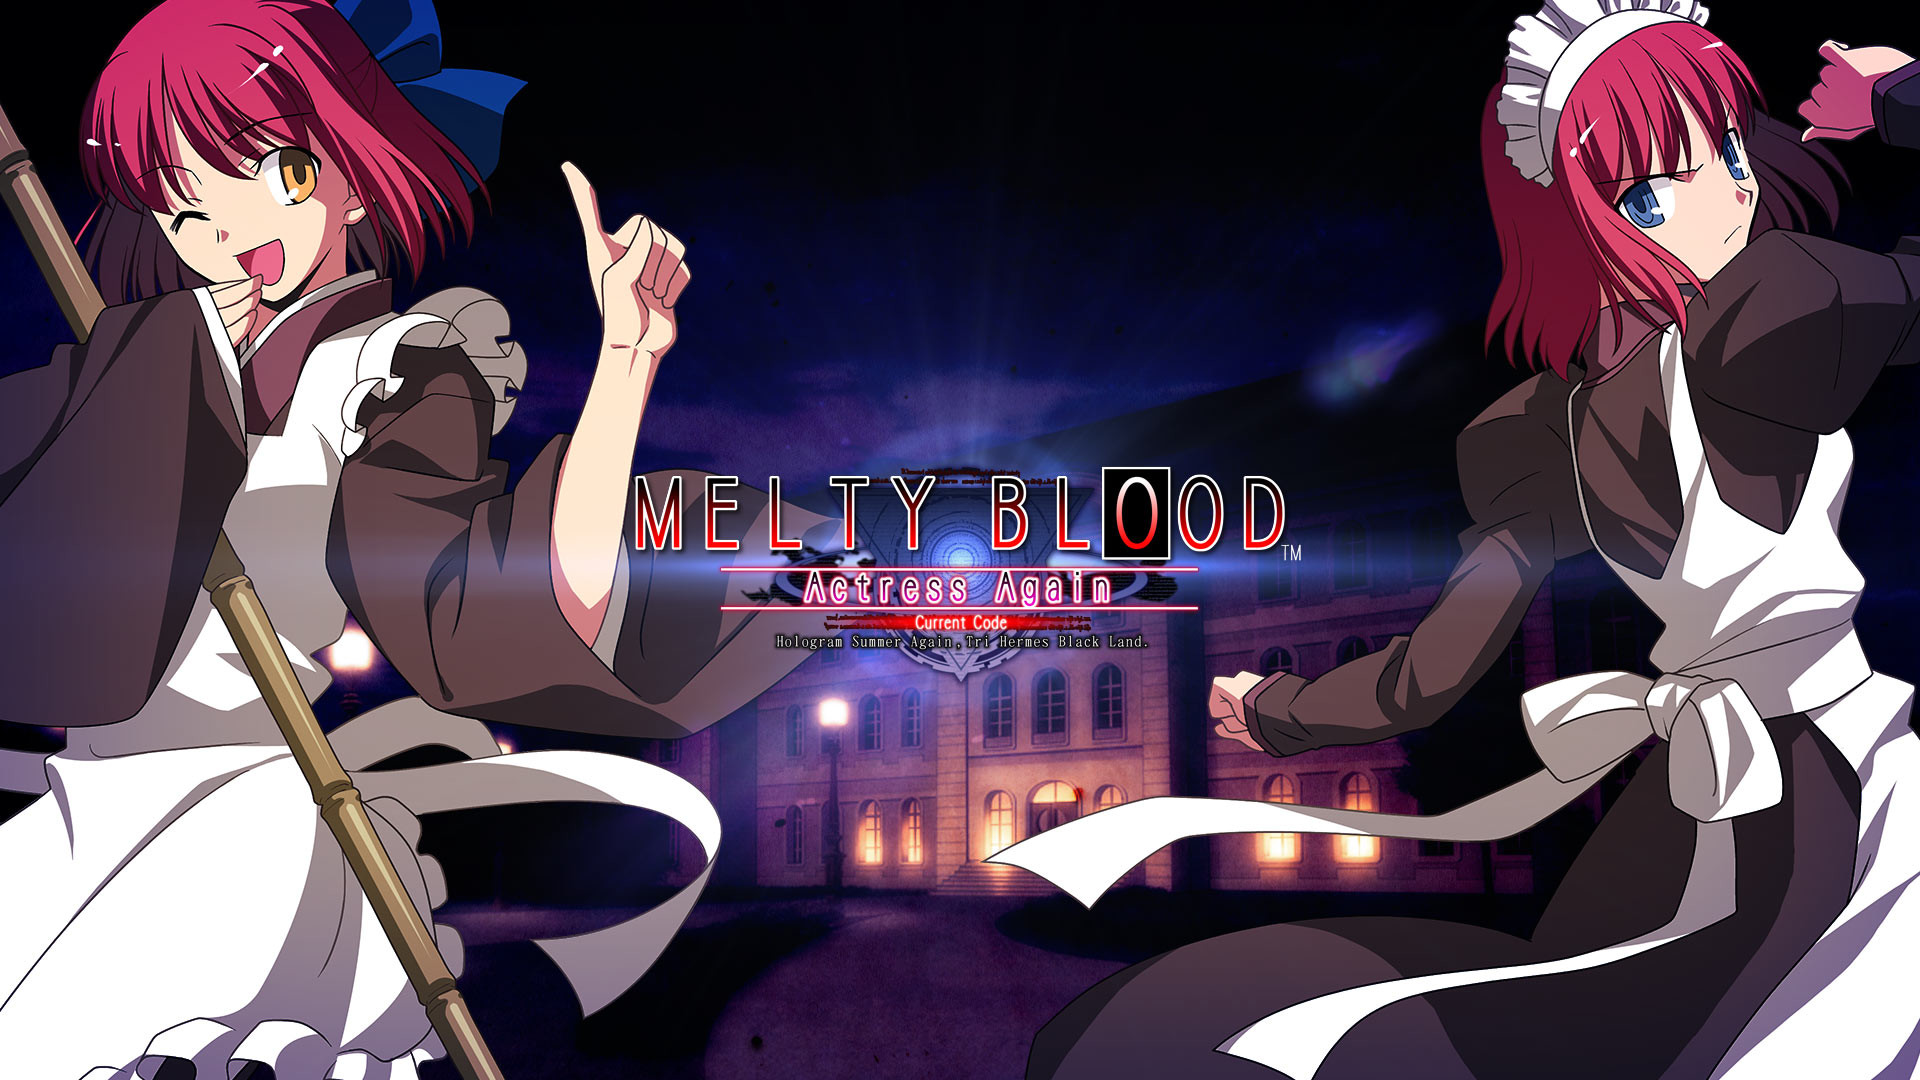 1920x1080 Steam Card Exchange :: Showcase :: MELTY BLOOD Actress Again Current Code